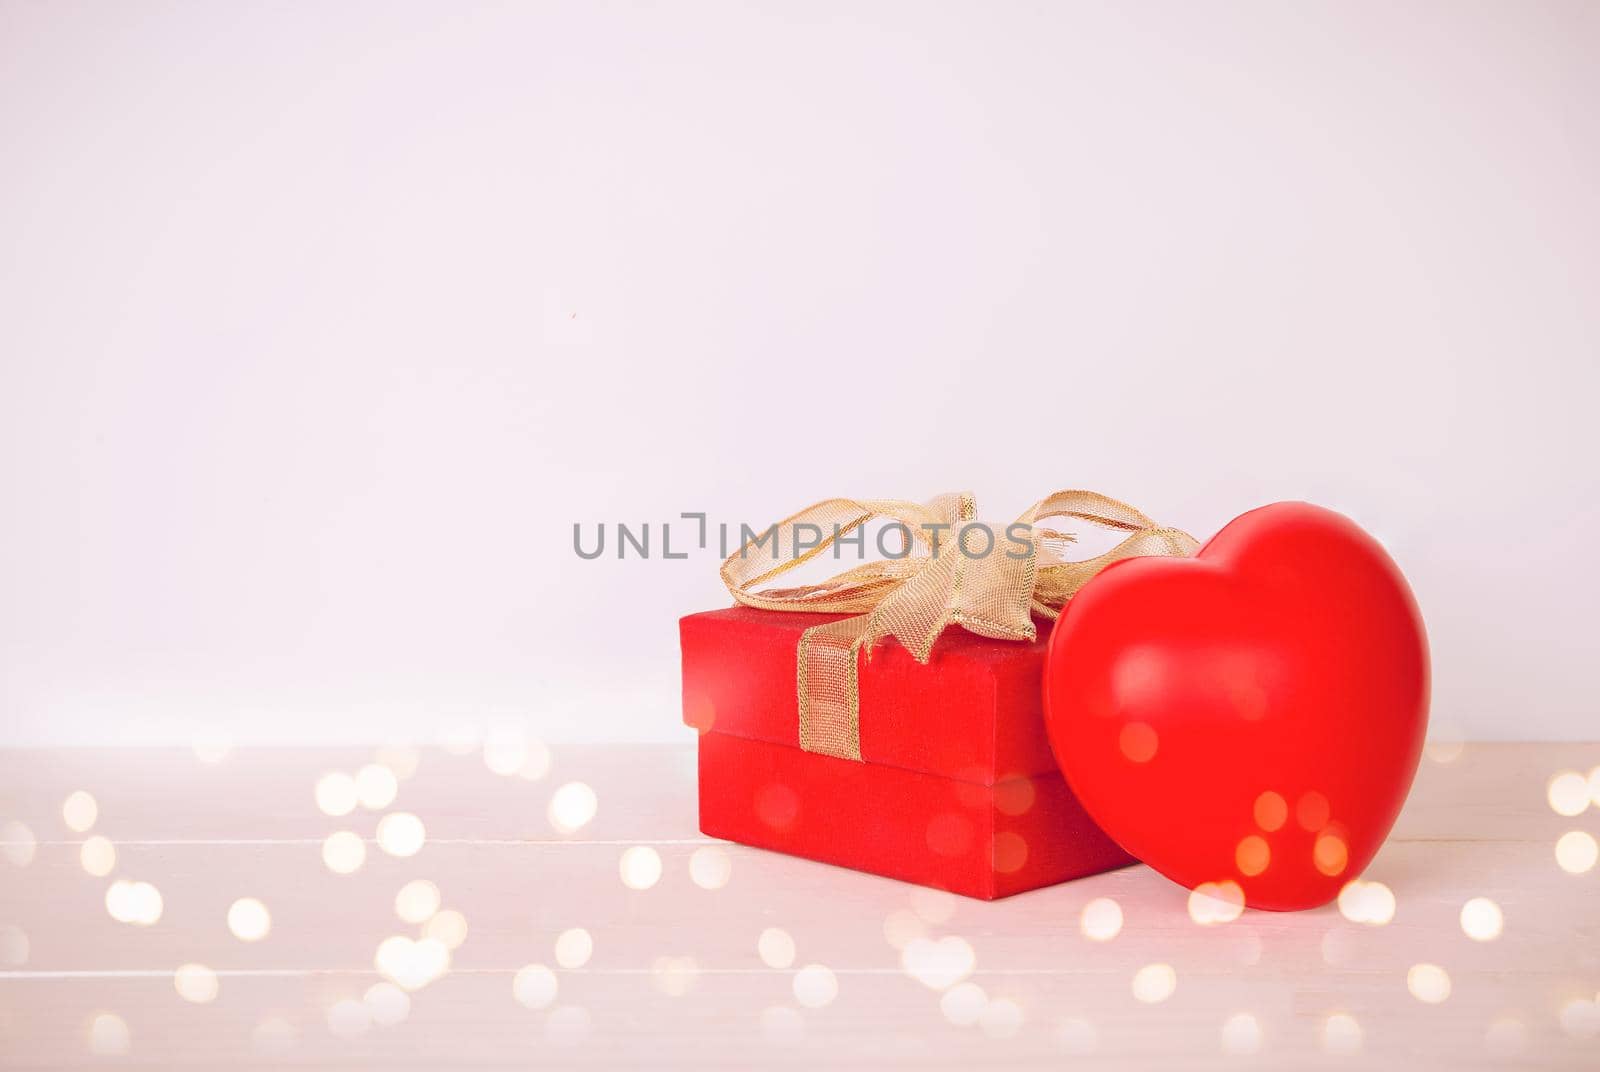 valentine, presents, love, gift, box, donate, charity, aid, donor, birthday, ribbon, congratulate, surprise, parcel, copyspace, holiday, red, wood, background, heart, shape, wooden, copy space, space, greeting, decoration, bow, celebration, day, table, desk, concept, nobody, happy, romantic, romance, festive, package, tied, anniversary, xmas, February, feeling, wrapped, bokeh, object, closeup, 14, paper, event by nnudoo